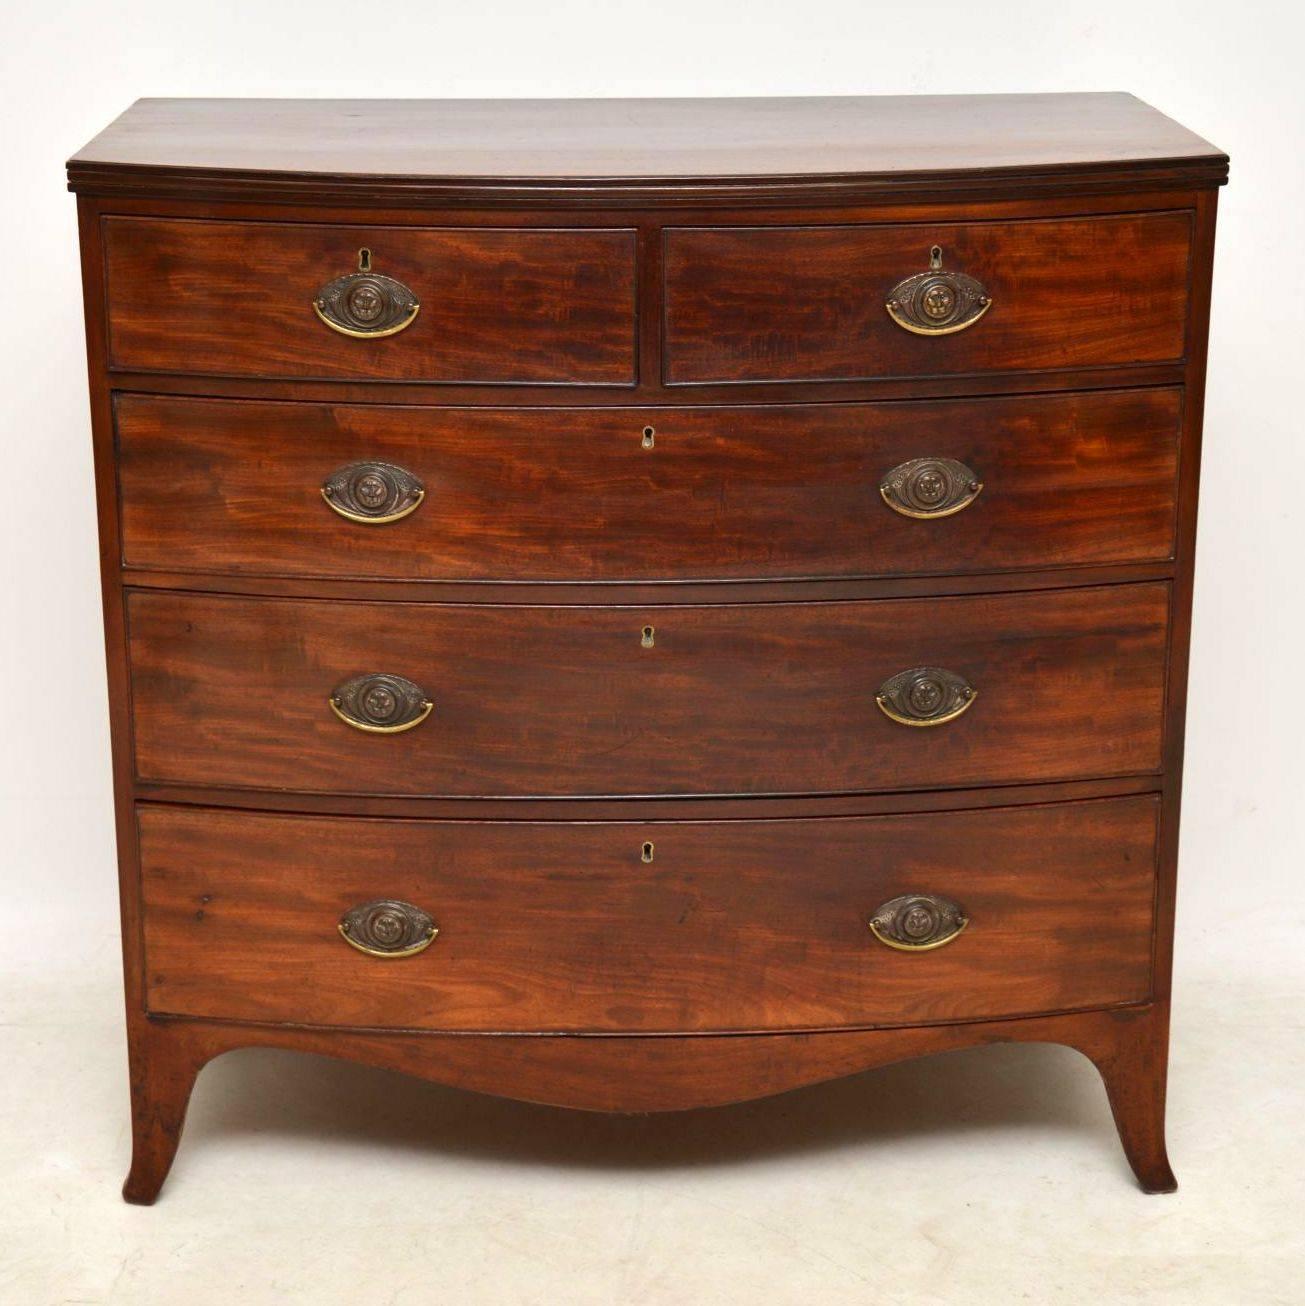 Antique George III bow fronted mahogany chest of drawers sitting on splayed feet. This chest has a lovely original colour with a bit of natural fade here and there. The drawers all work well and are graduated in depth with brass plate back handles.